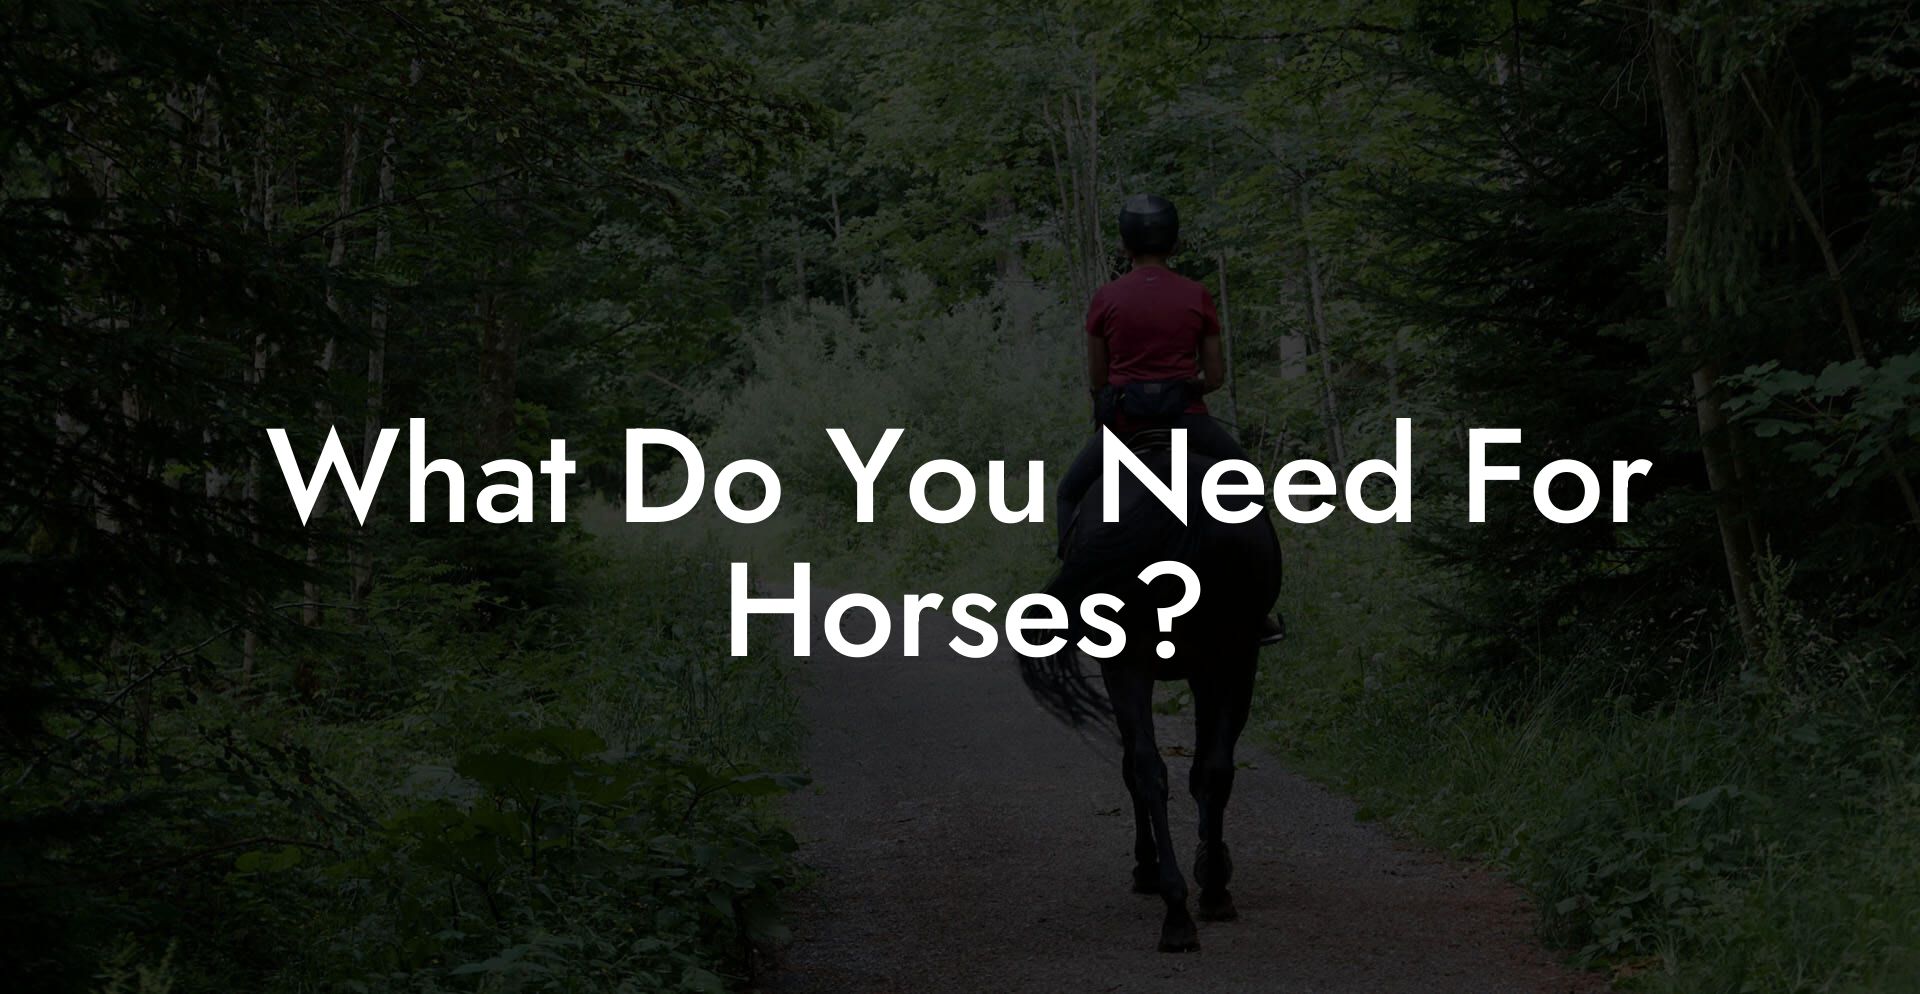 What Do You Need For Horses?